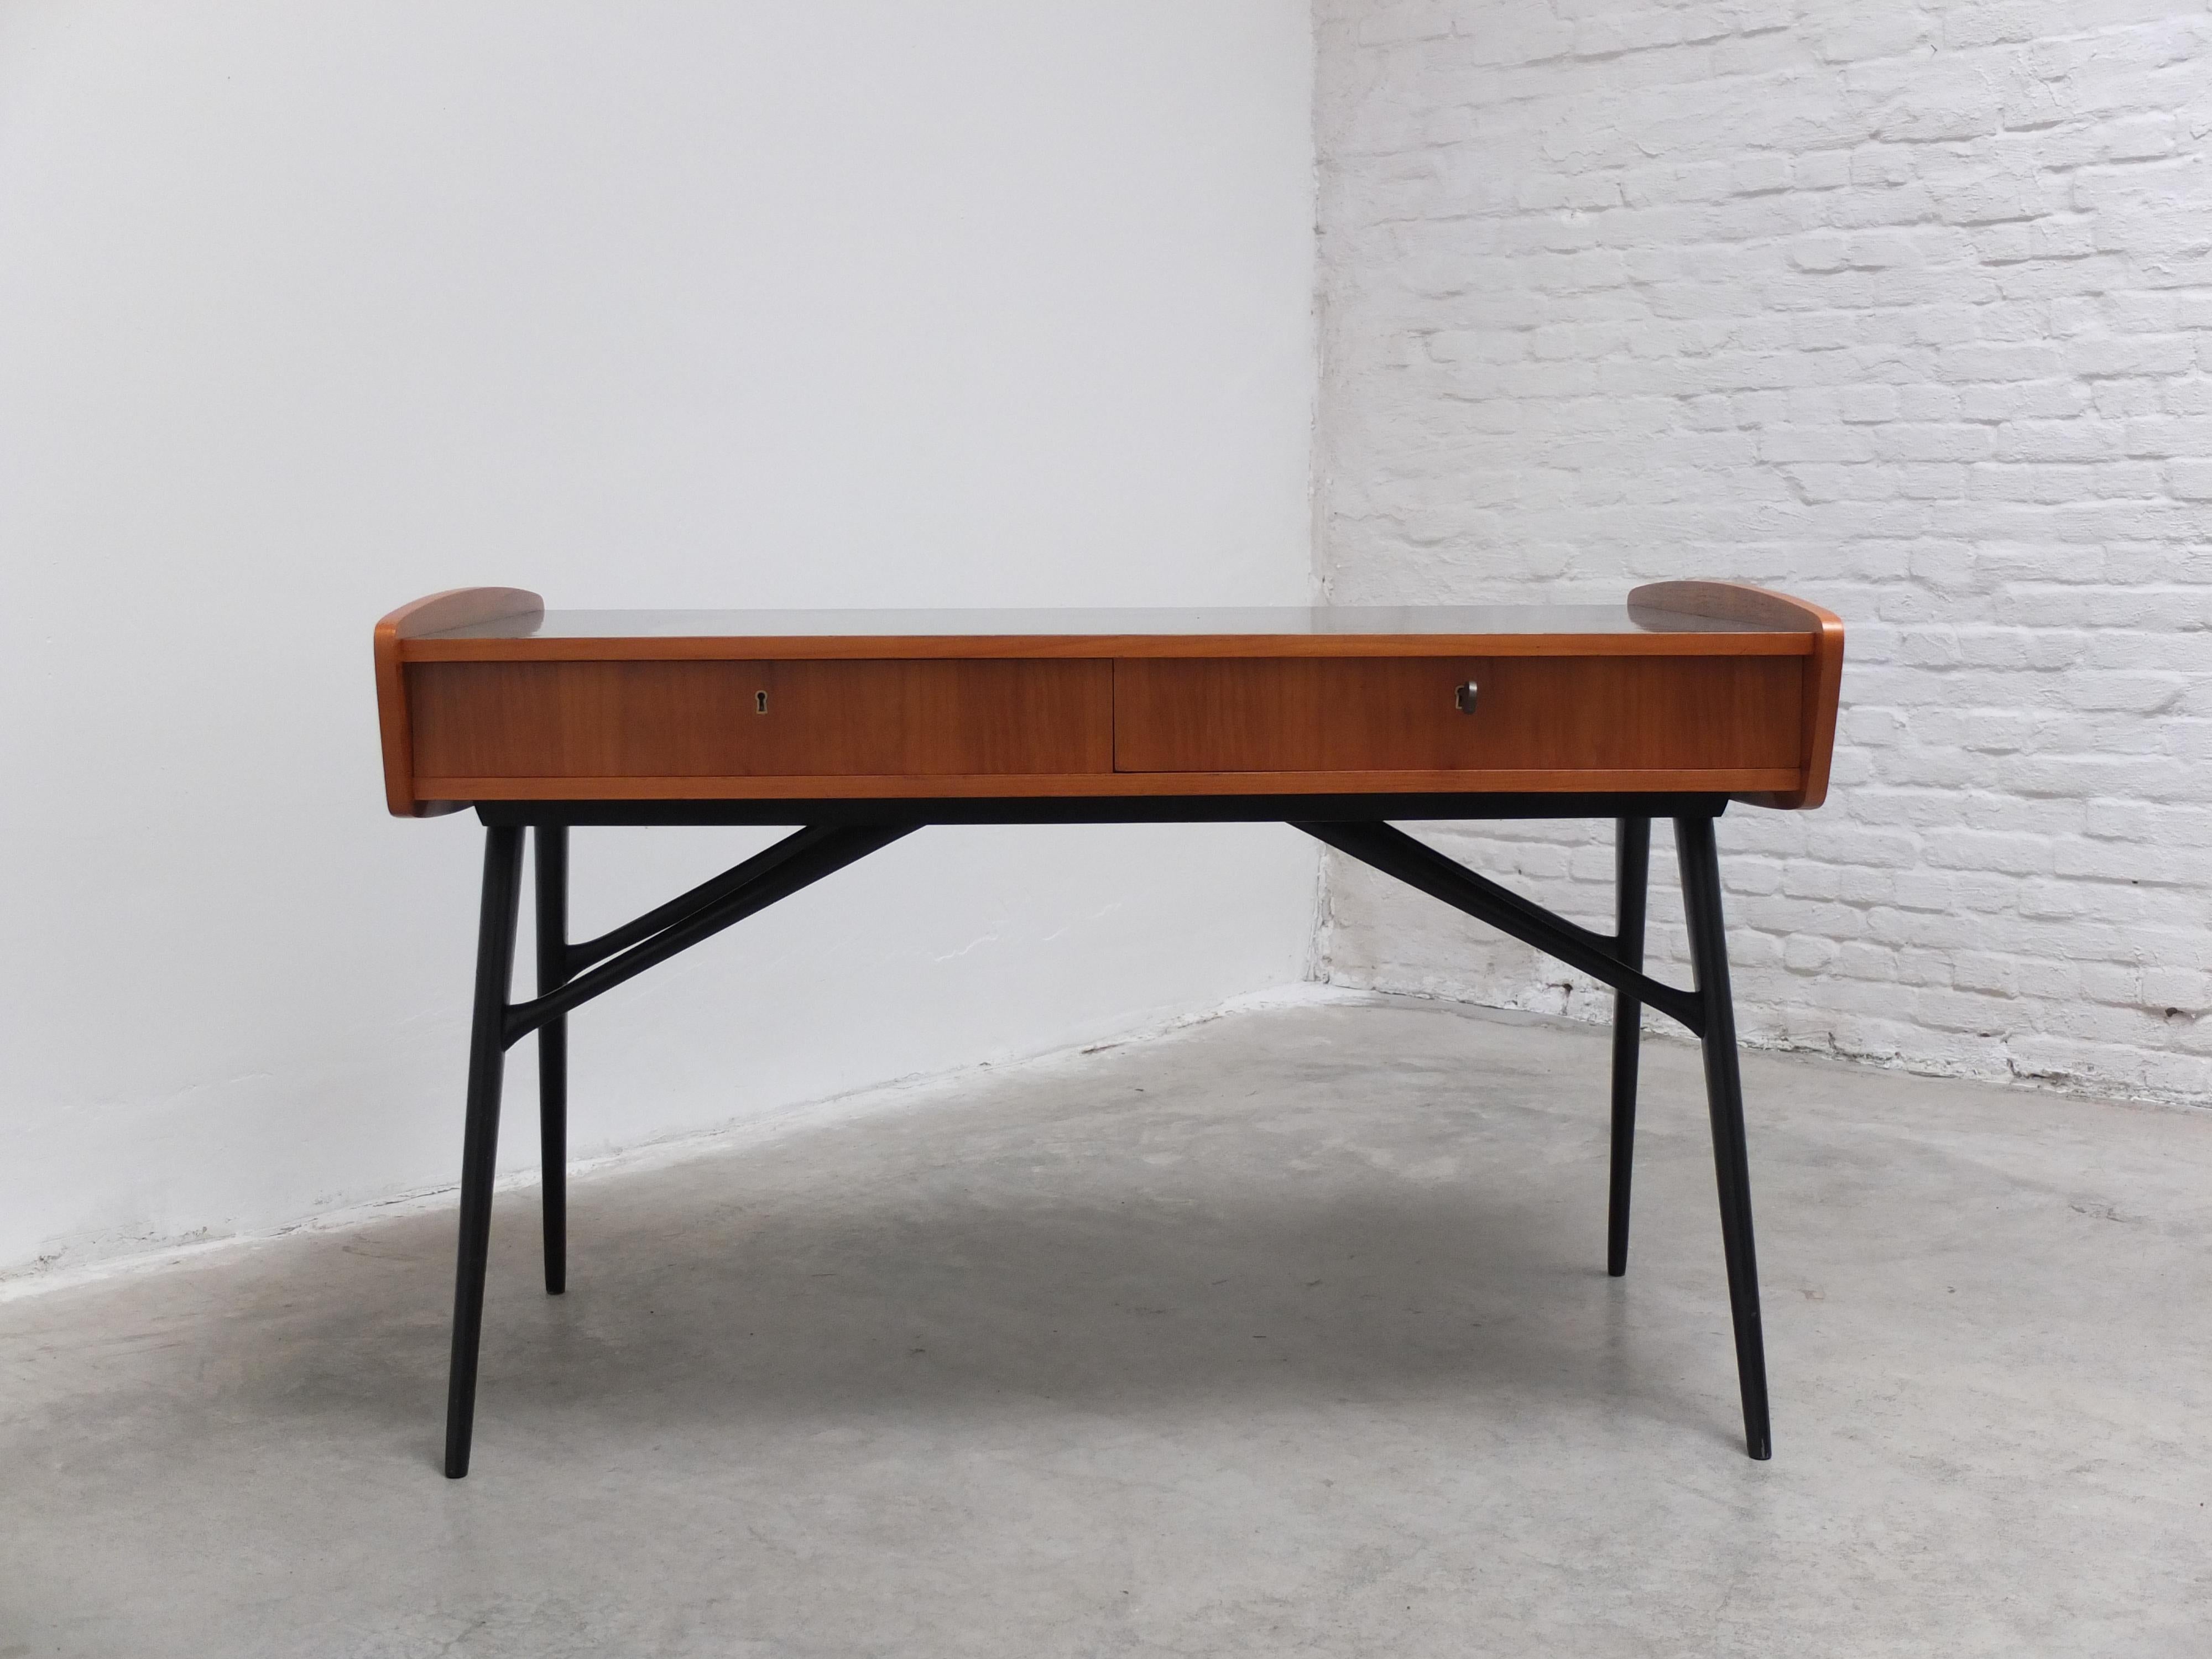 20th Century Rare Desk with Matching 'S5' Armchair by Alfred Hendrickx for Belform, 1950s For Sale